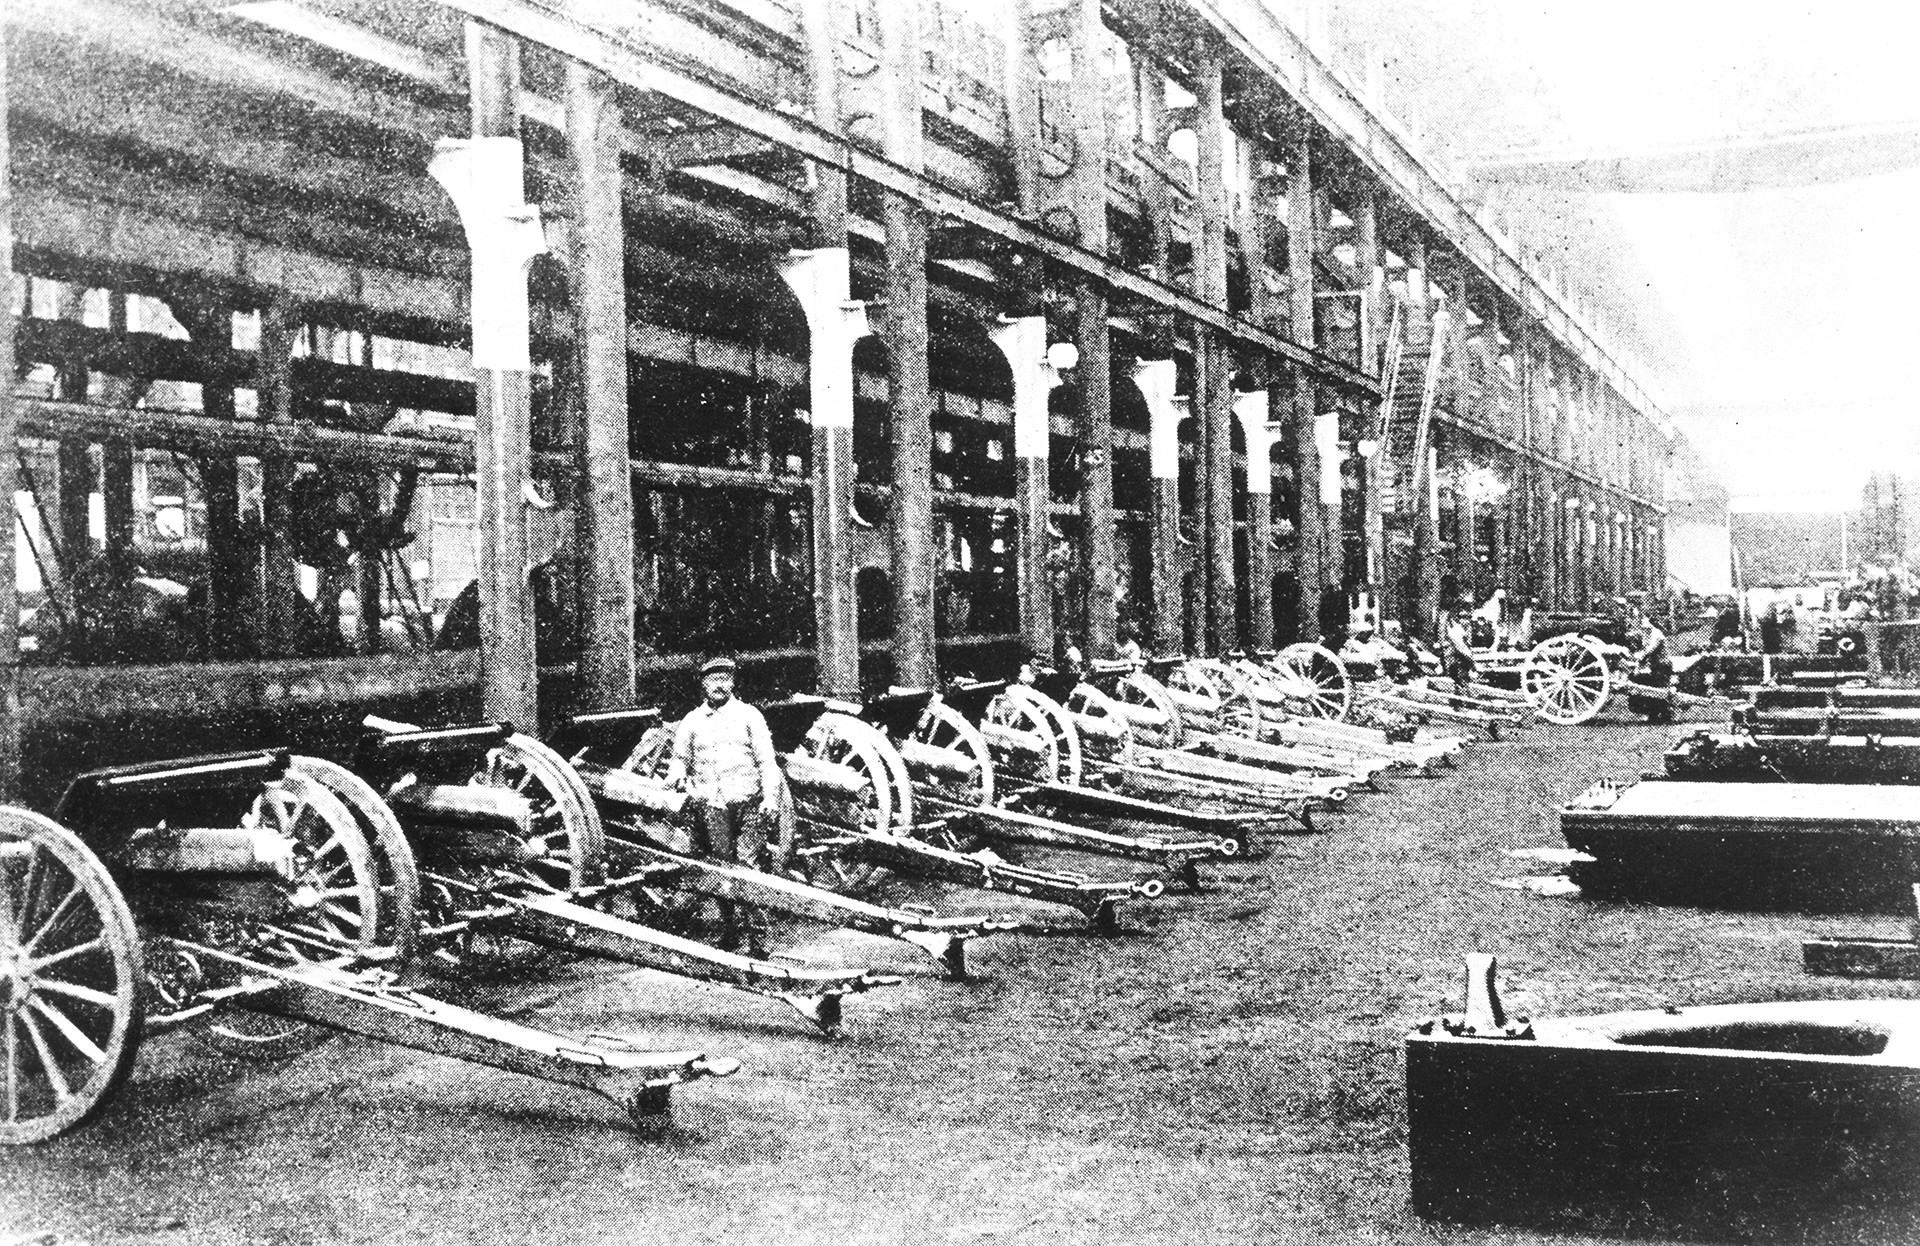 In 1916, Russian industry overcame the deficit of war supplies